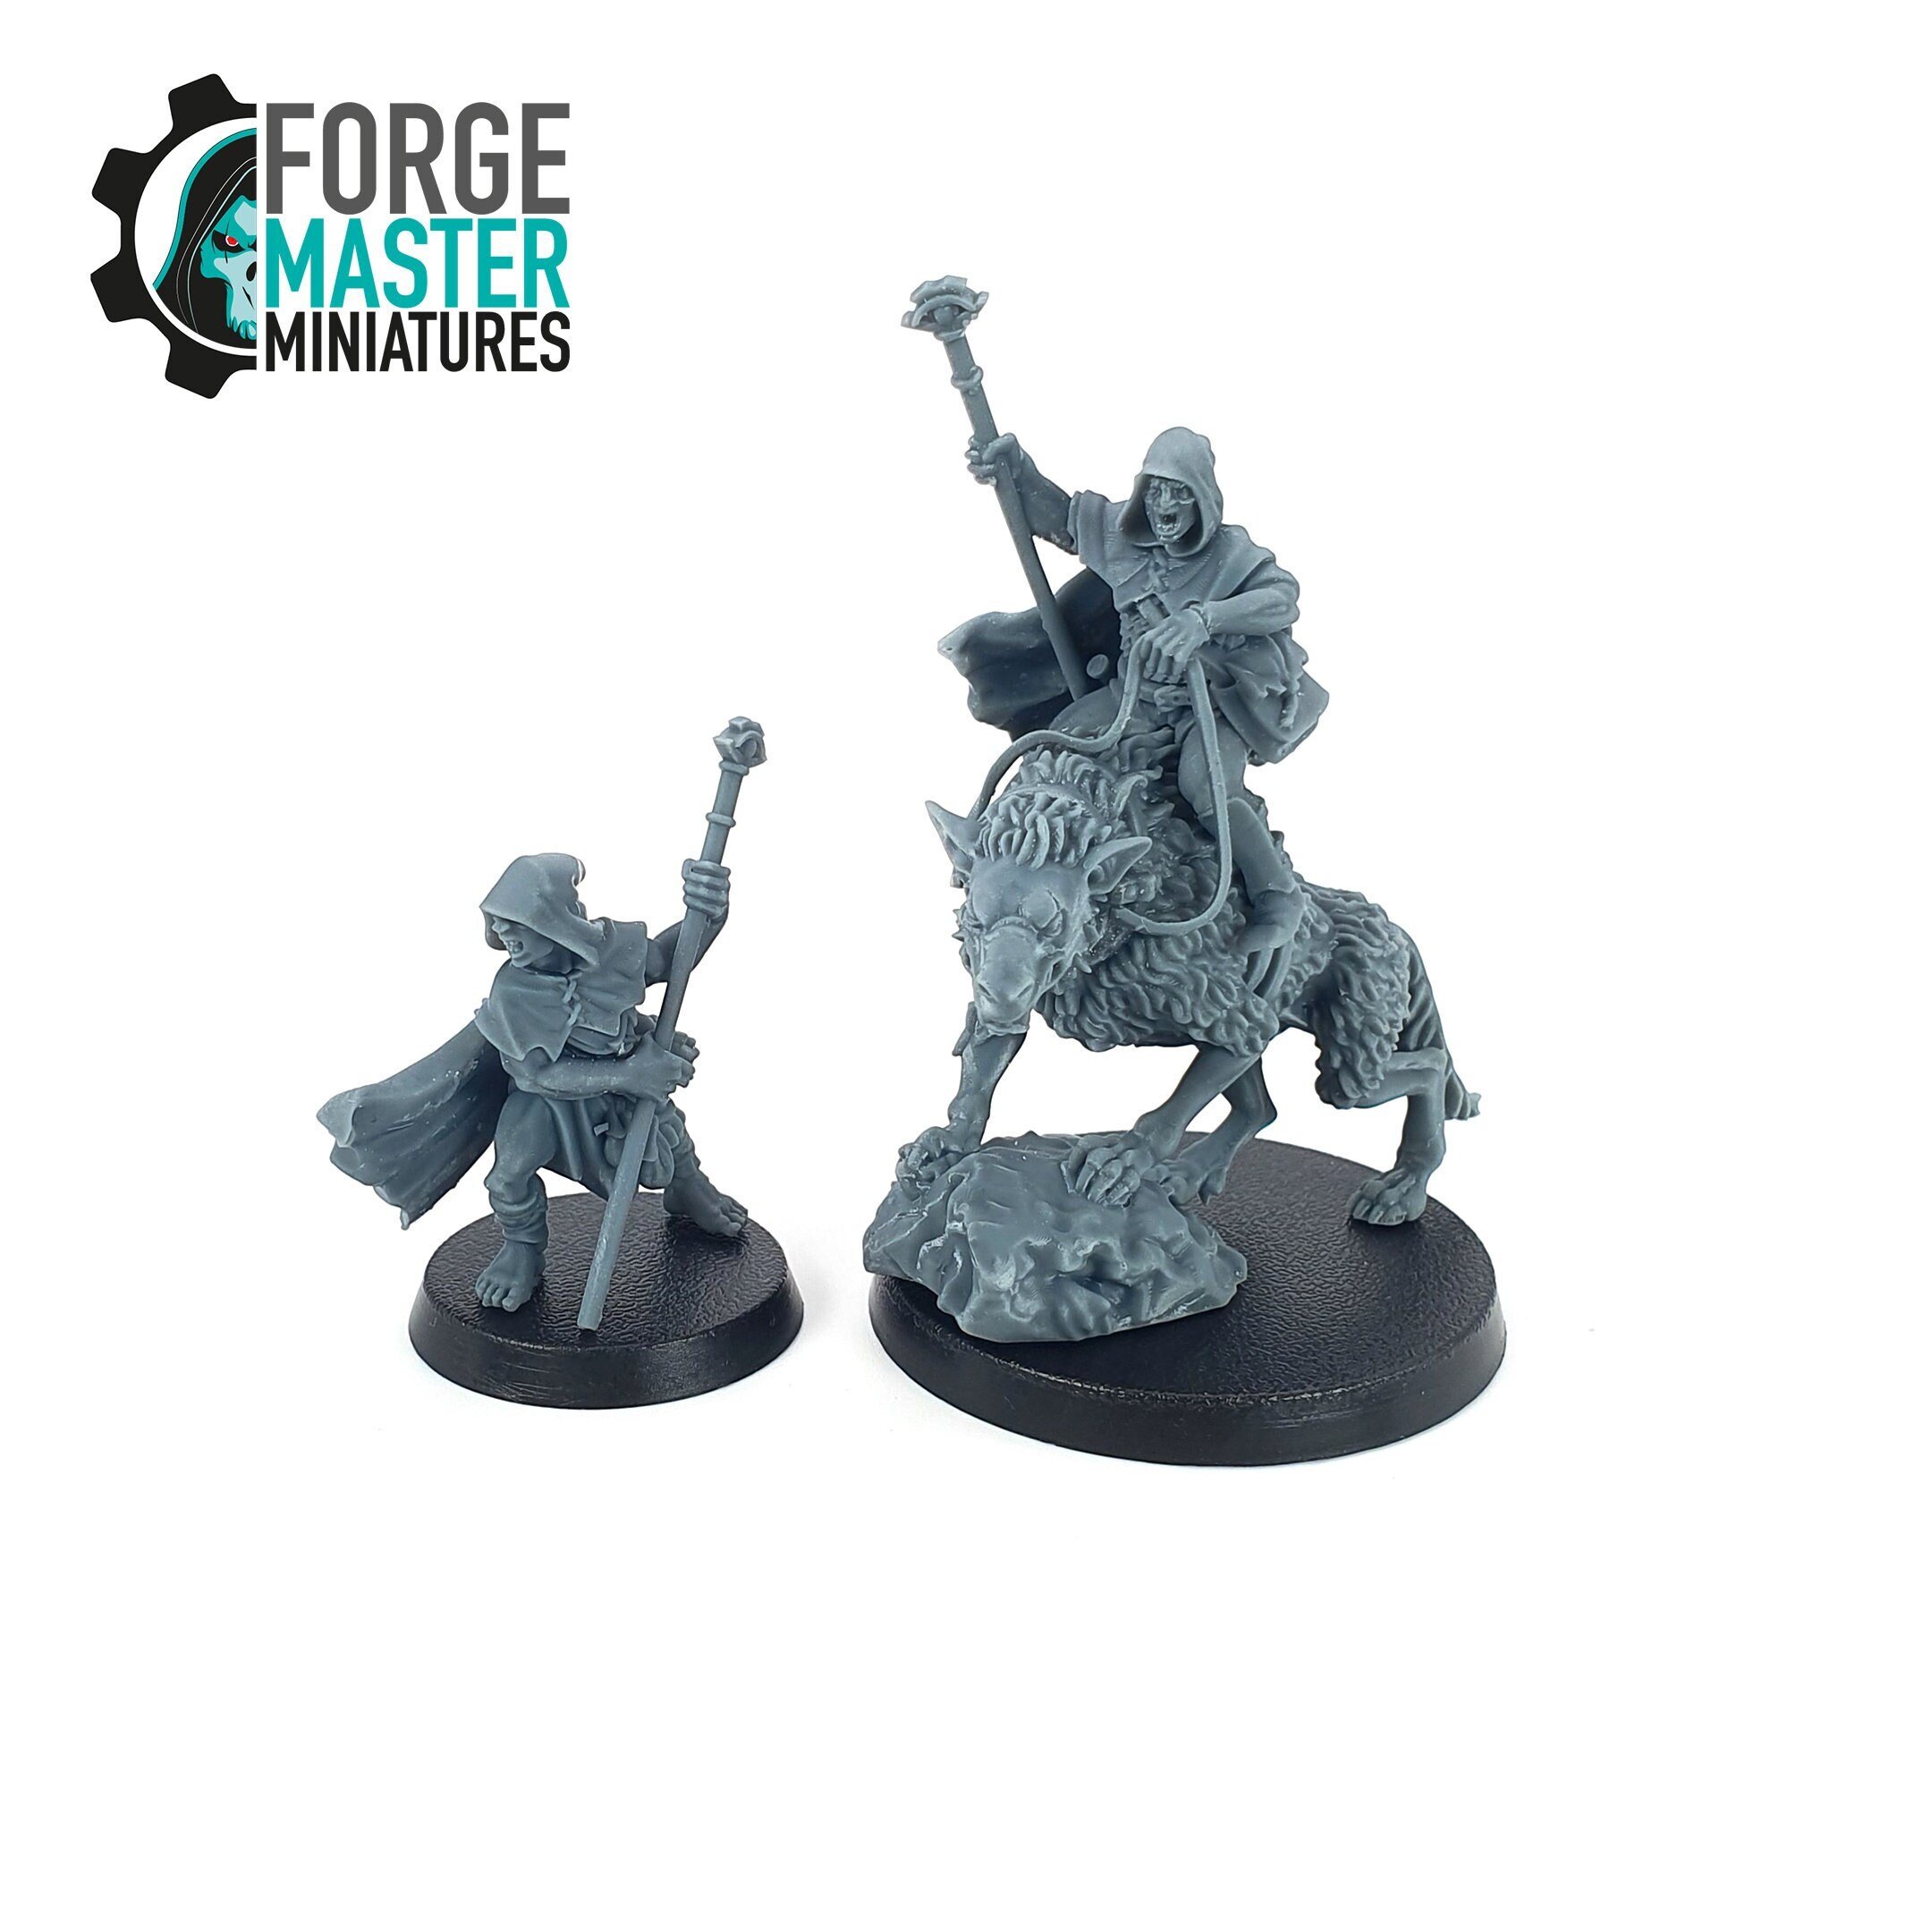 Minions of Darkness Shaman Orc wargaming miniatures by Unreleased Miniatures 3d Pritned by Forgemaster Miniatures